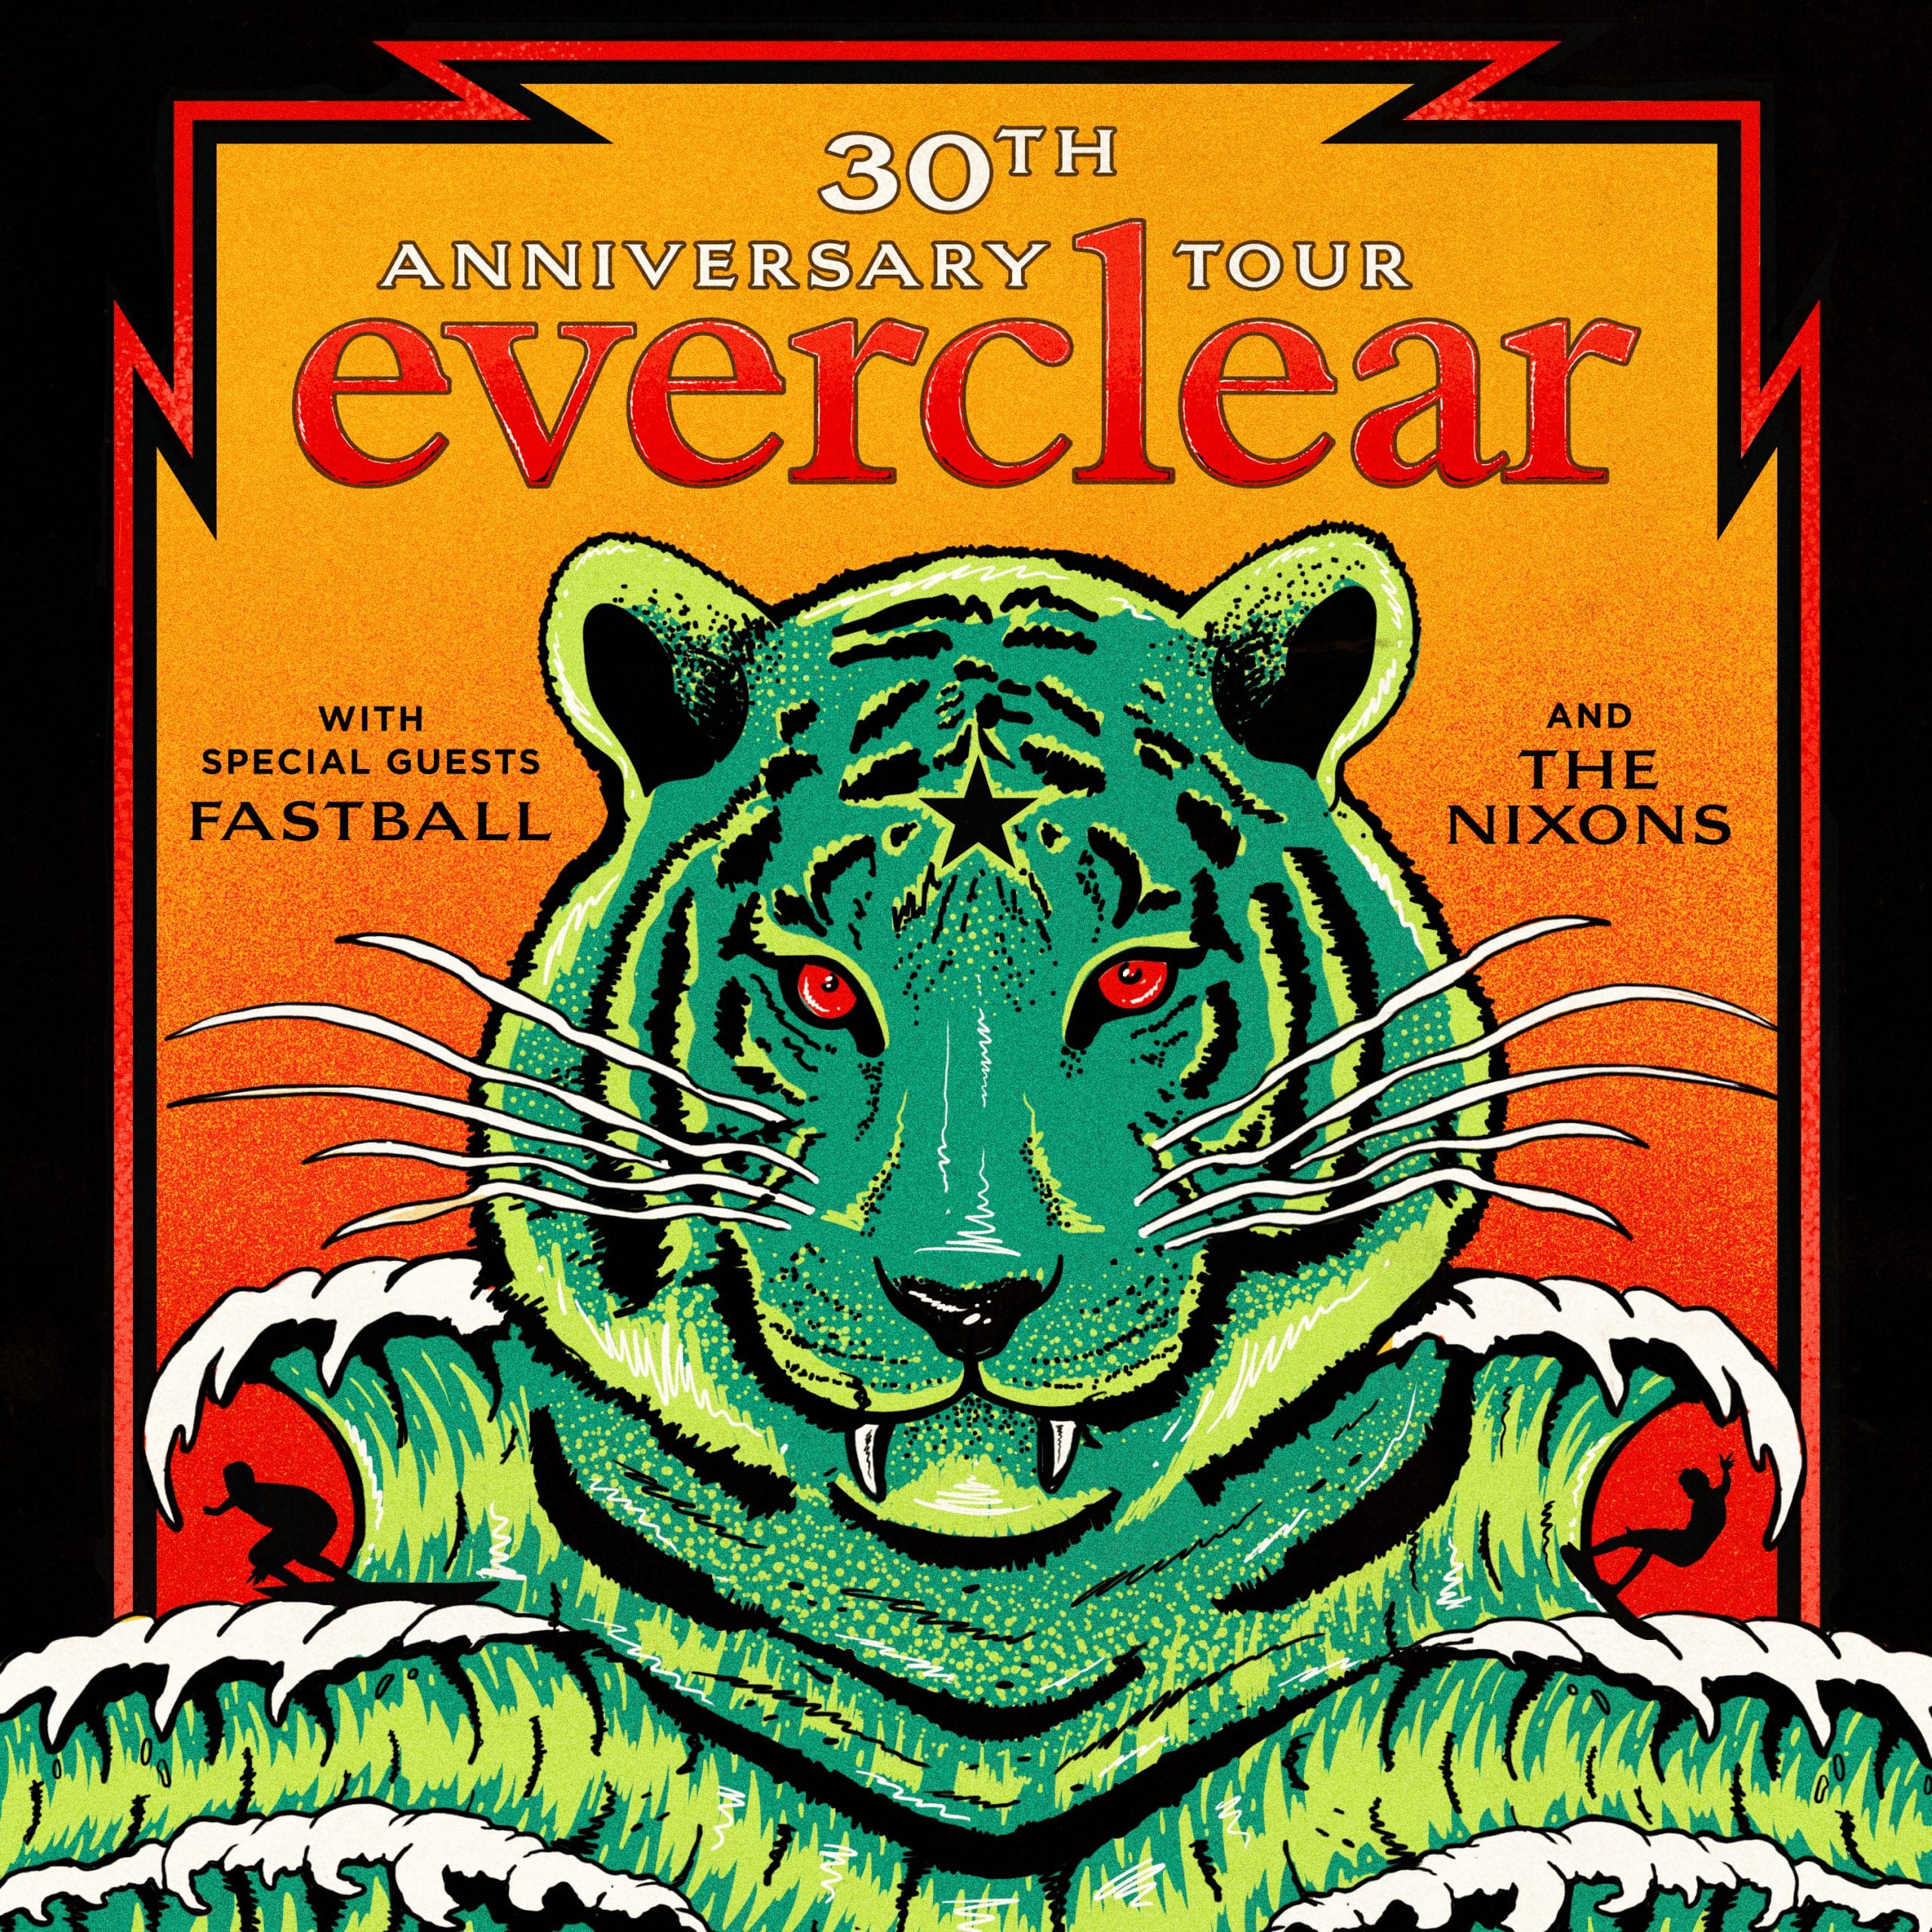 EVERCLEAR 30TH ANNIVERSARY TOUR WITH FASTBALL AND THE NIXONS